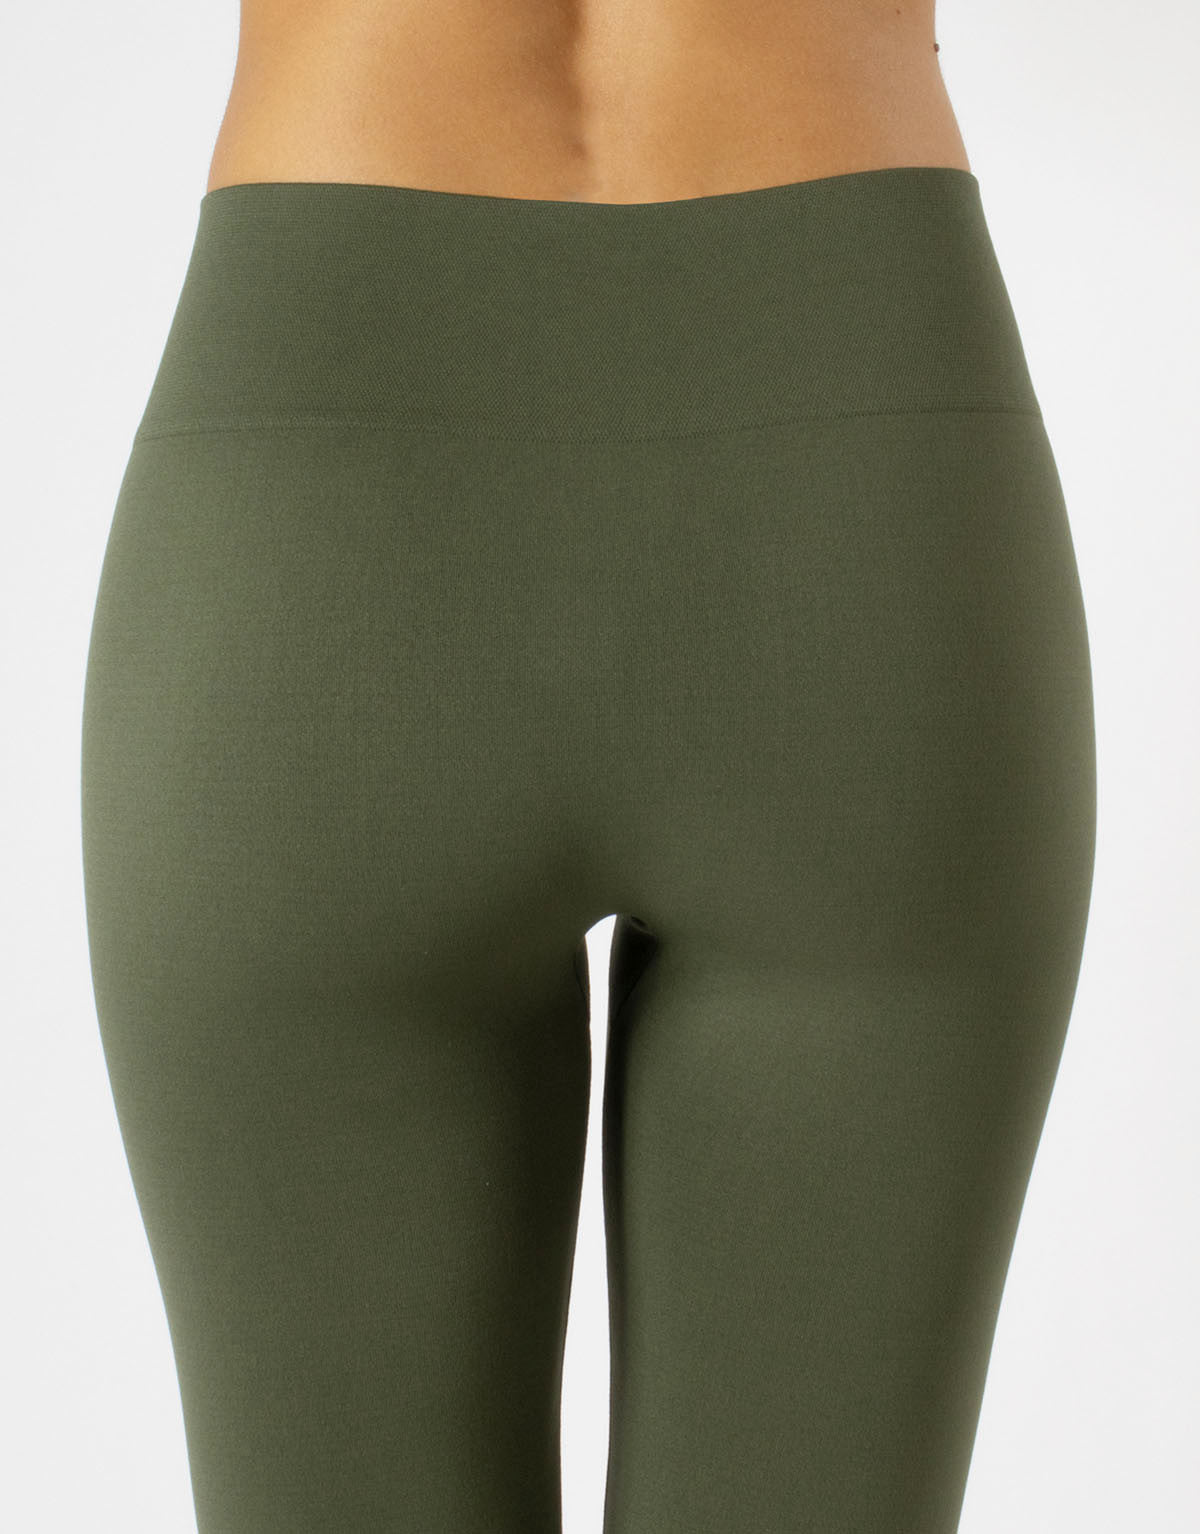 Calzitaly Seamless Leggings - Soft and plain khaki green leggings with a deep elasticated waist band and gusset for a comfortable fit.